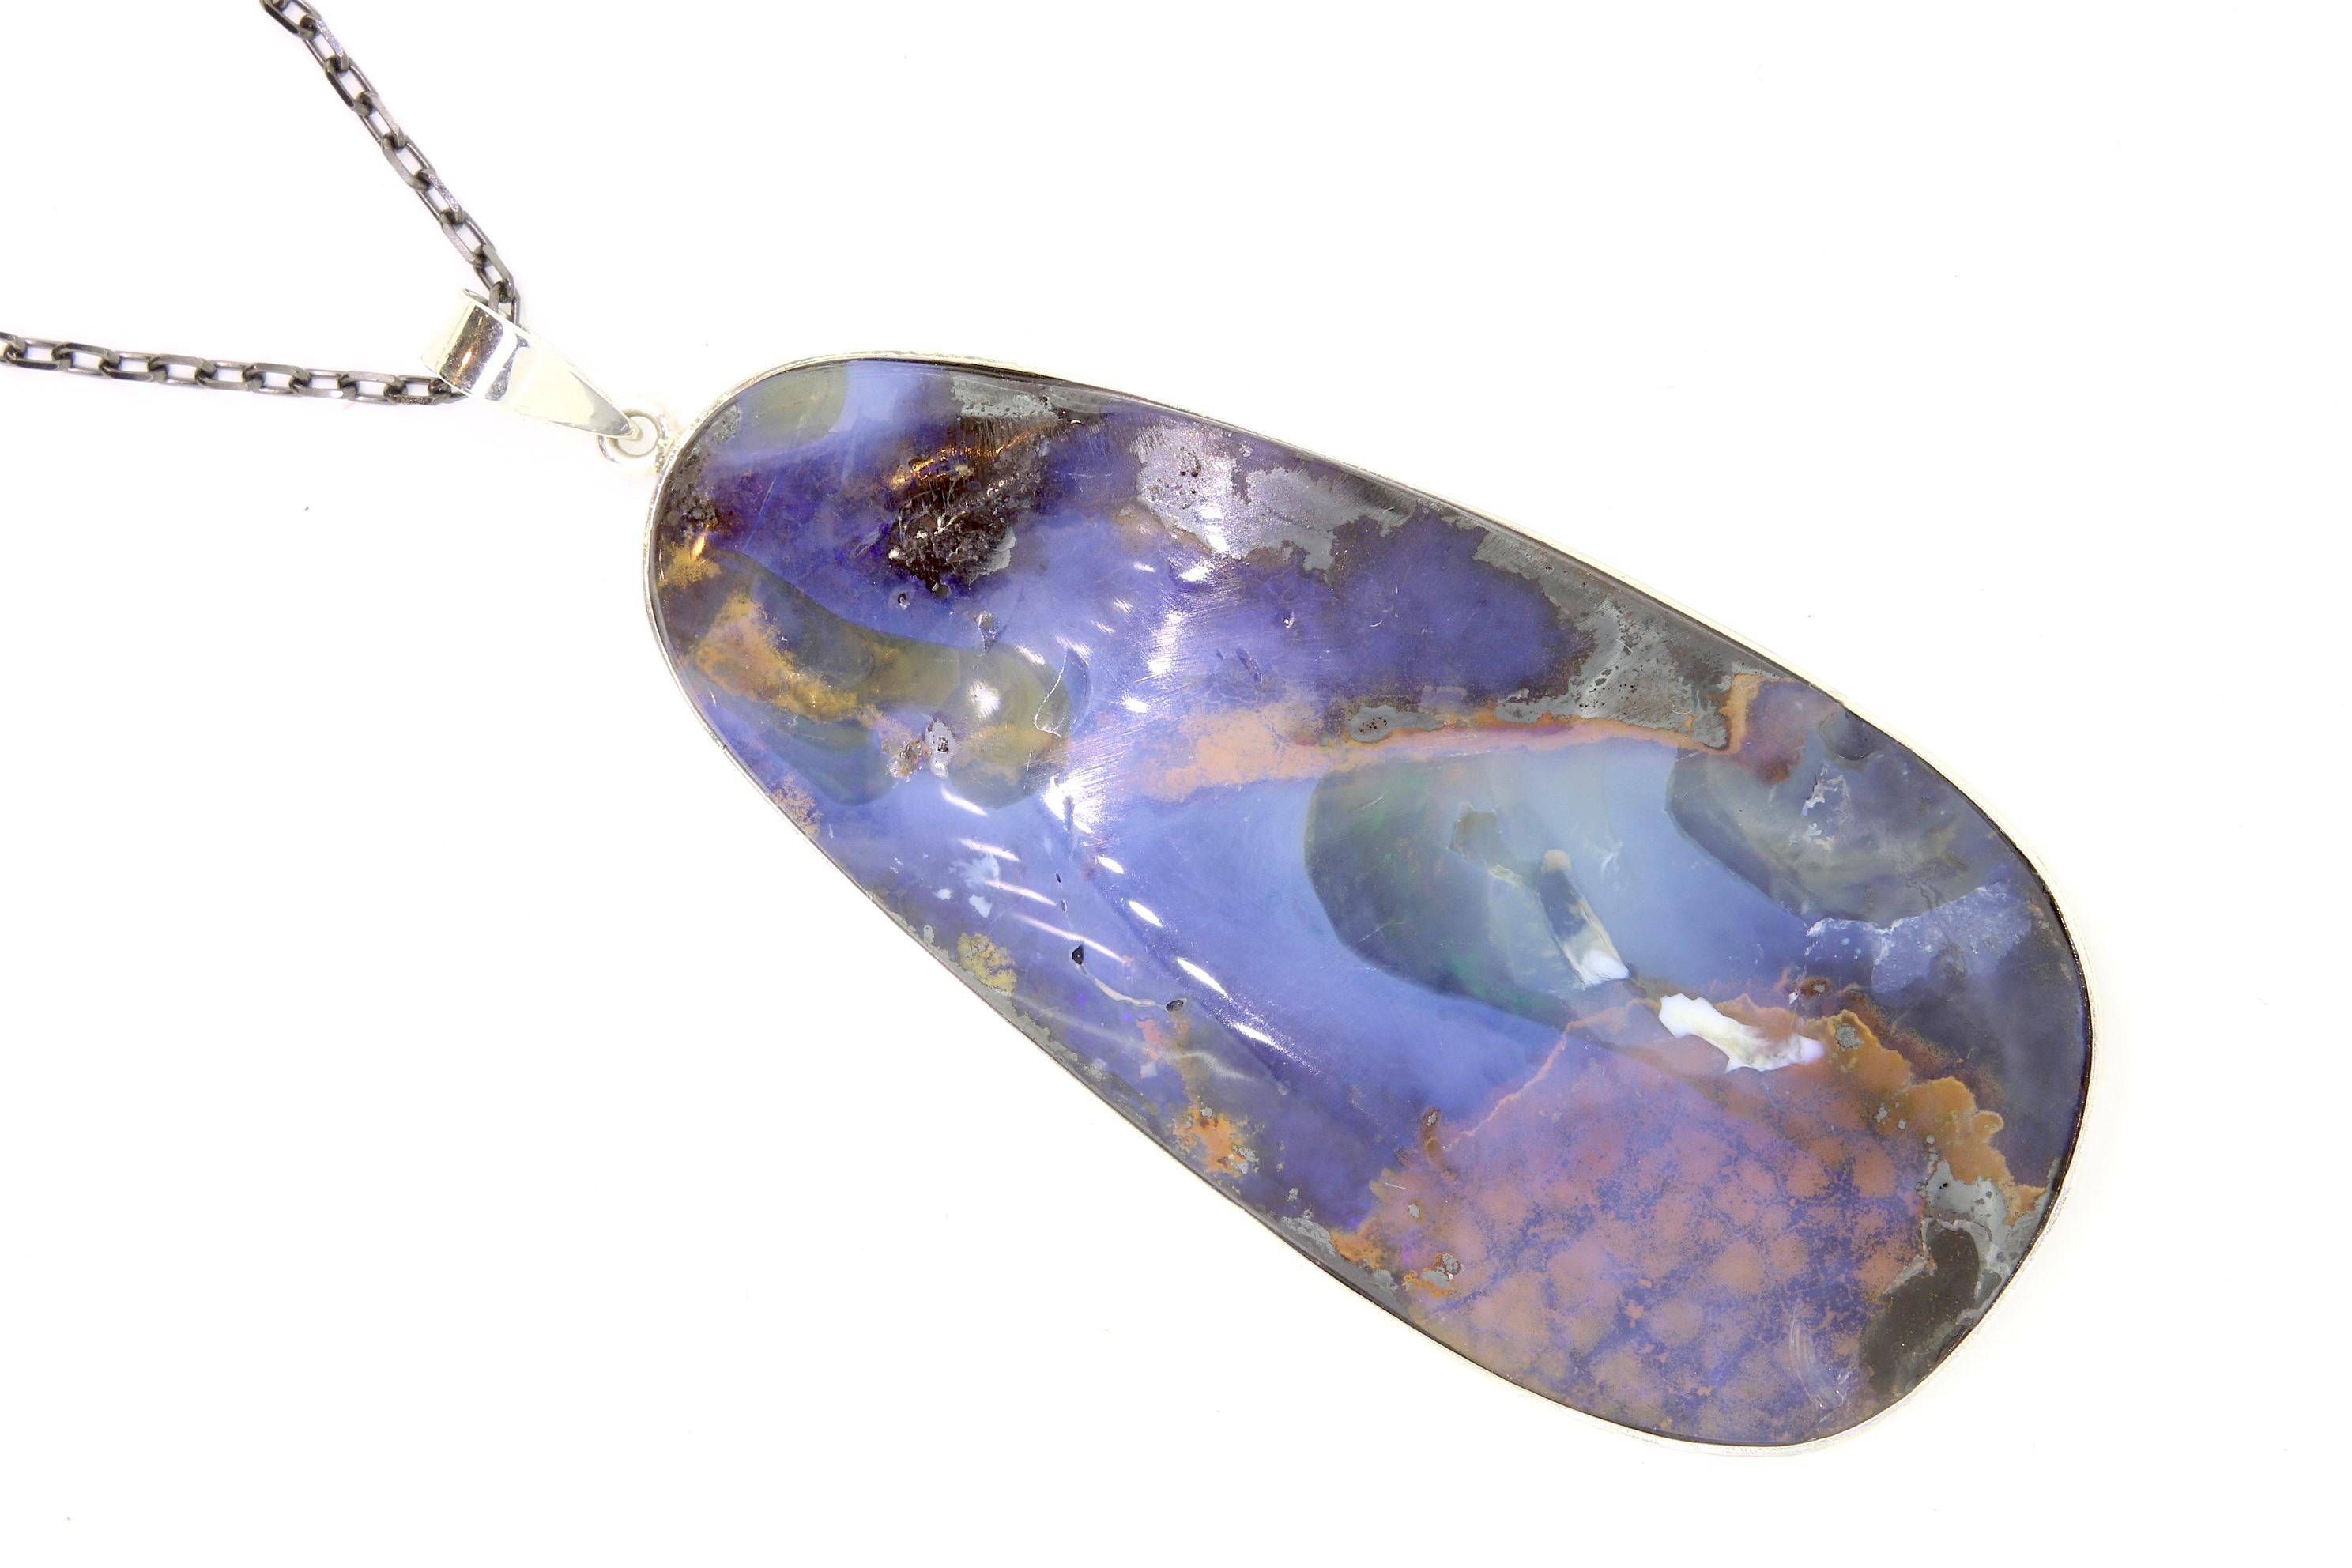 A unique piece, this Opal is a true showstopper! 

Material: Silver
Center Stone Details: 1 Opal at 65 x 30mm
Chain: 16 inch

Fine one-of-a-kind craftsmanship meets incredible quality in this breathtaking piece of jewelry.